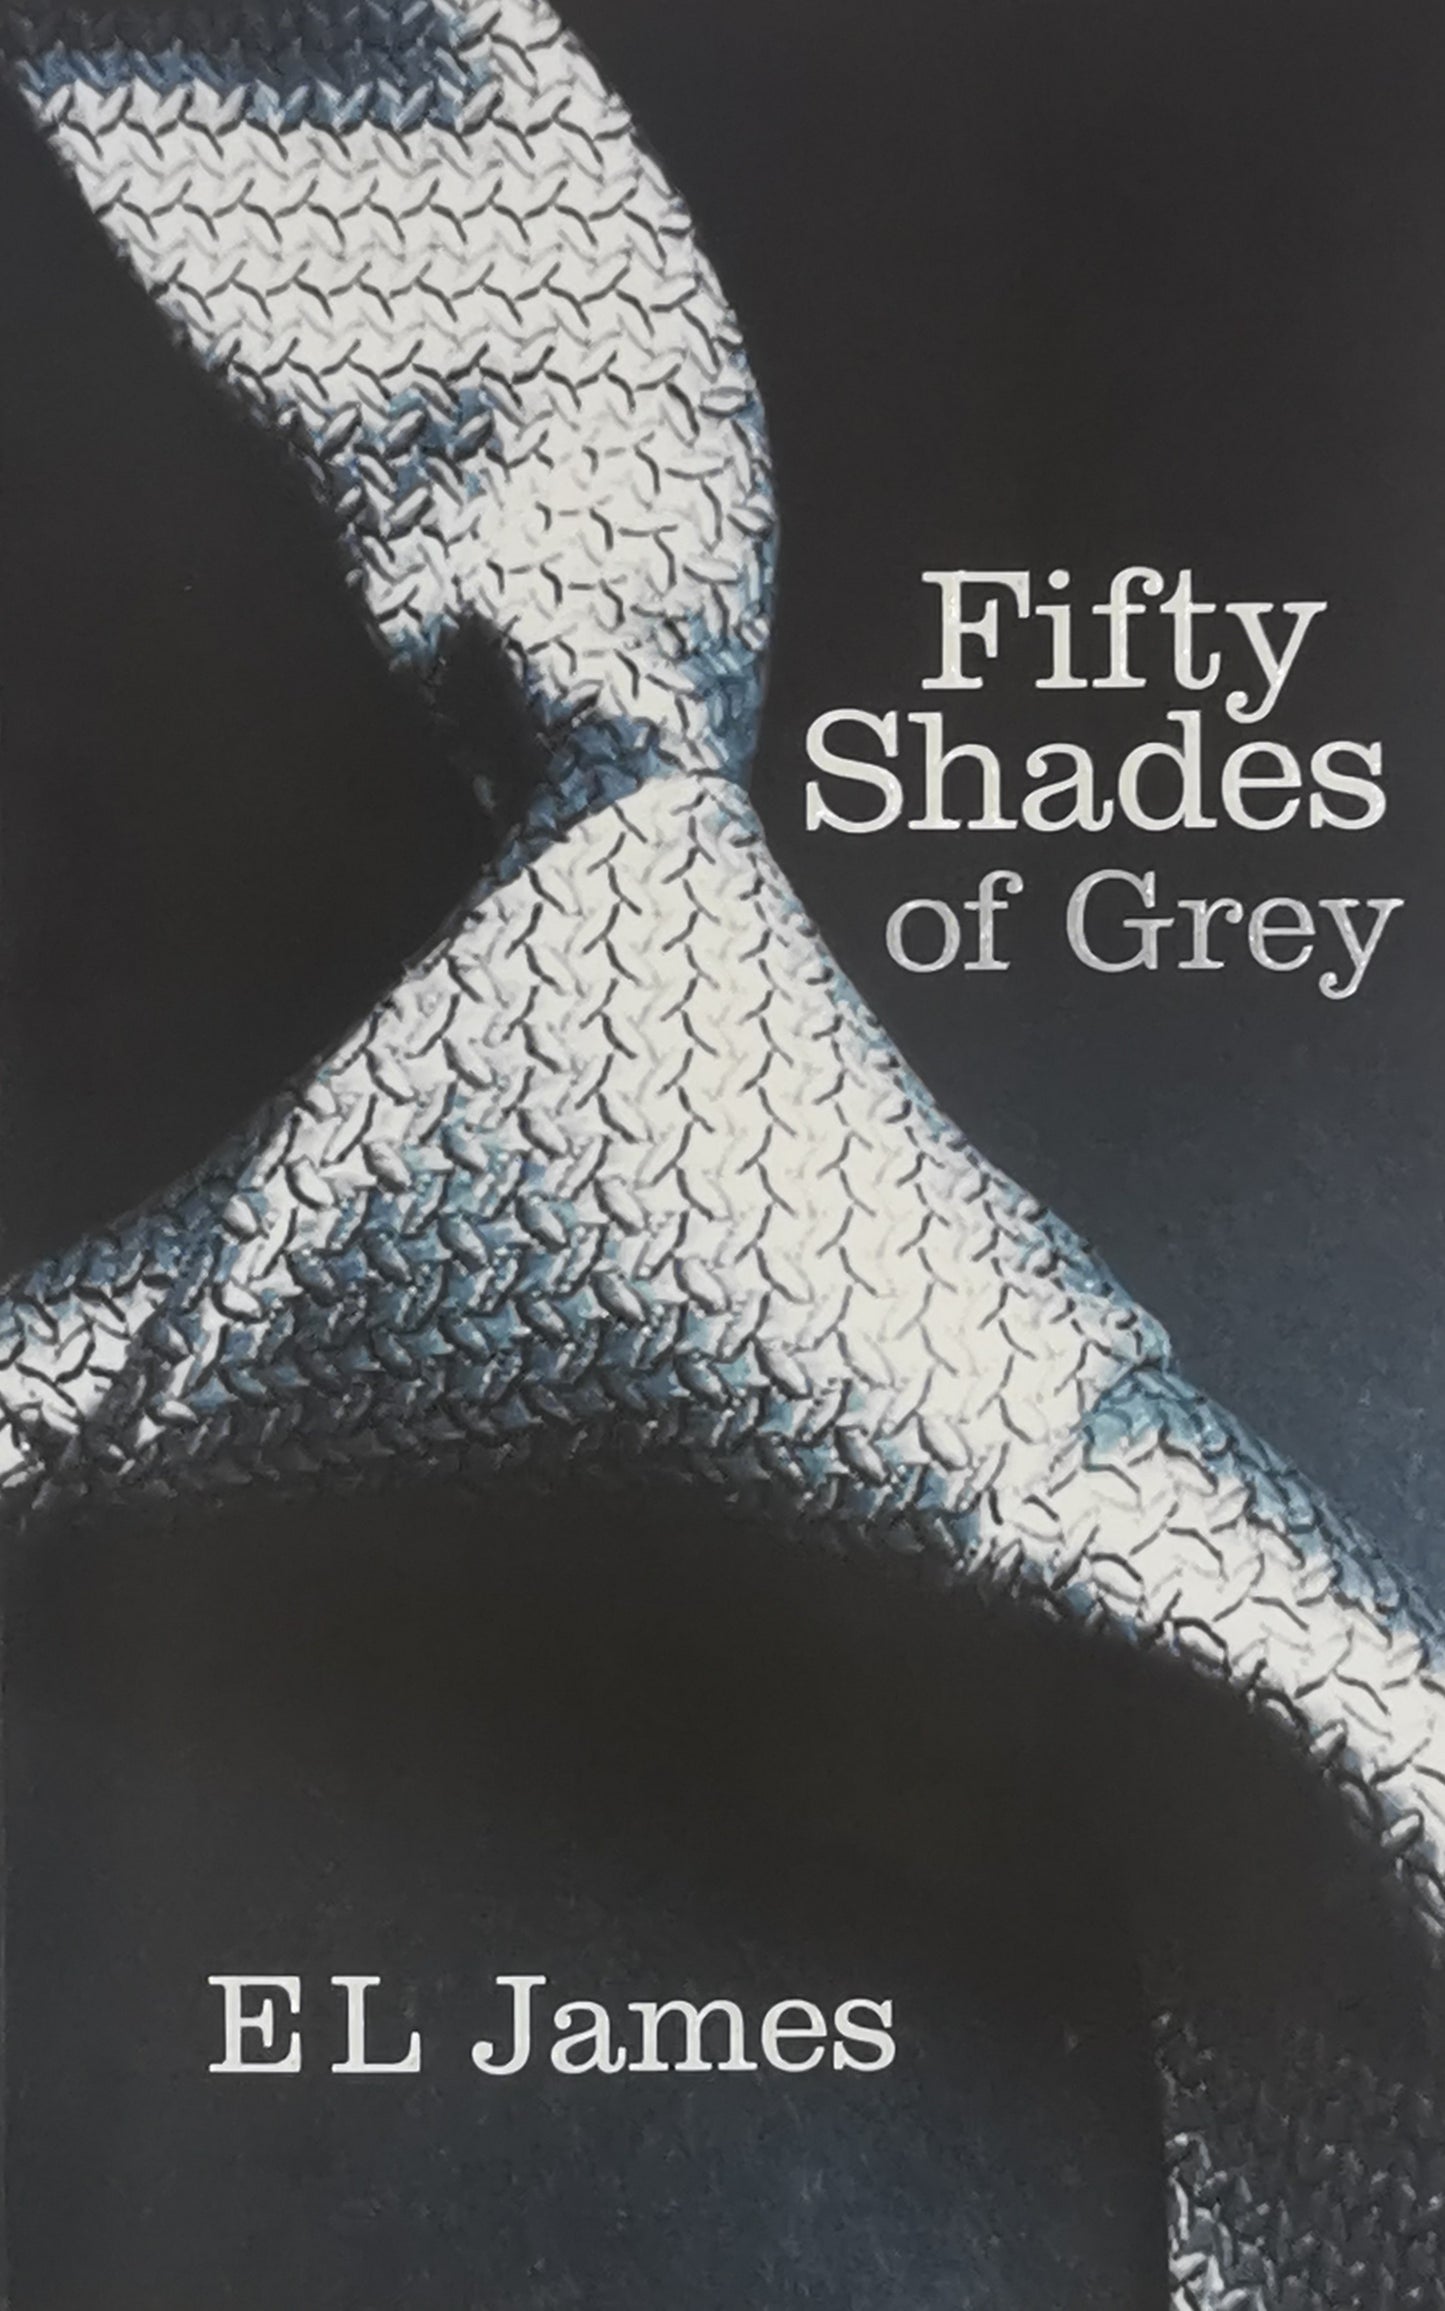 James, E.L. - FIFTY SHADES OF GREY